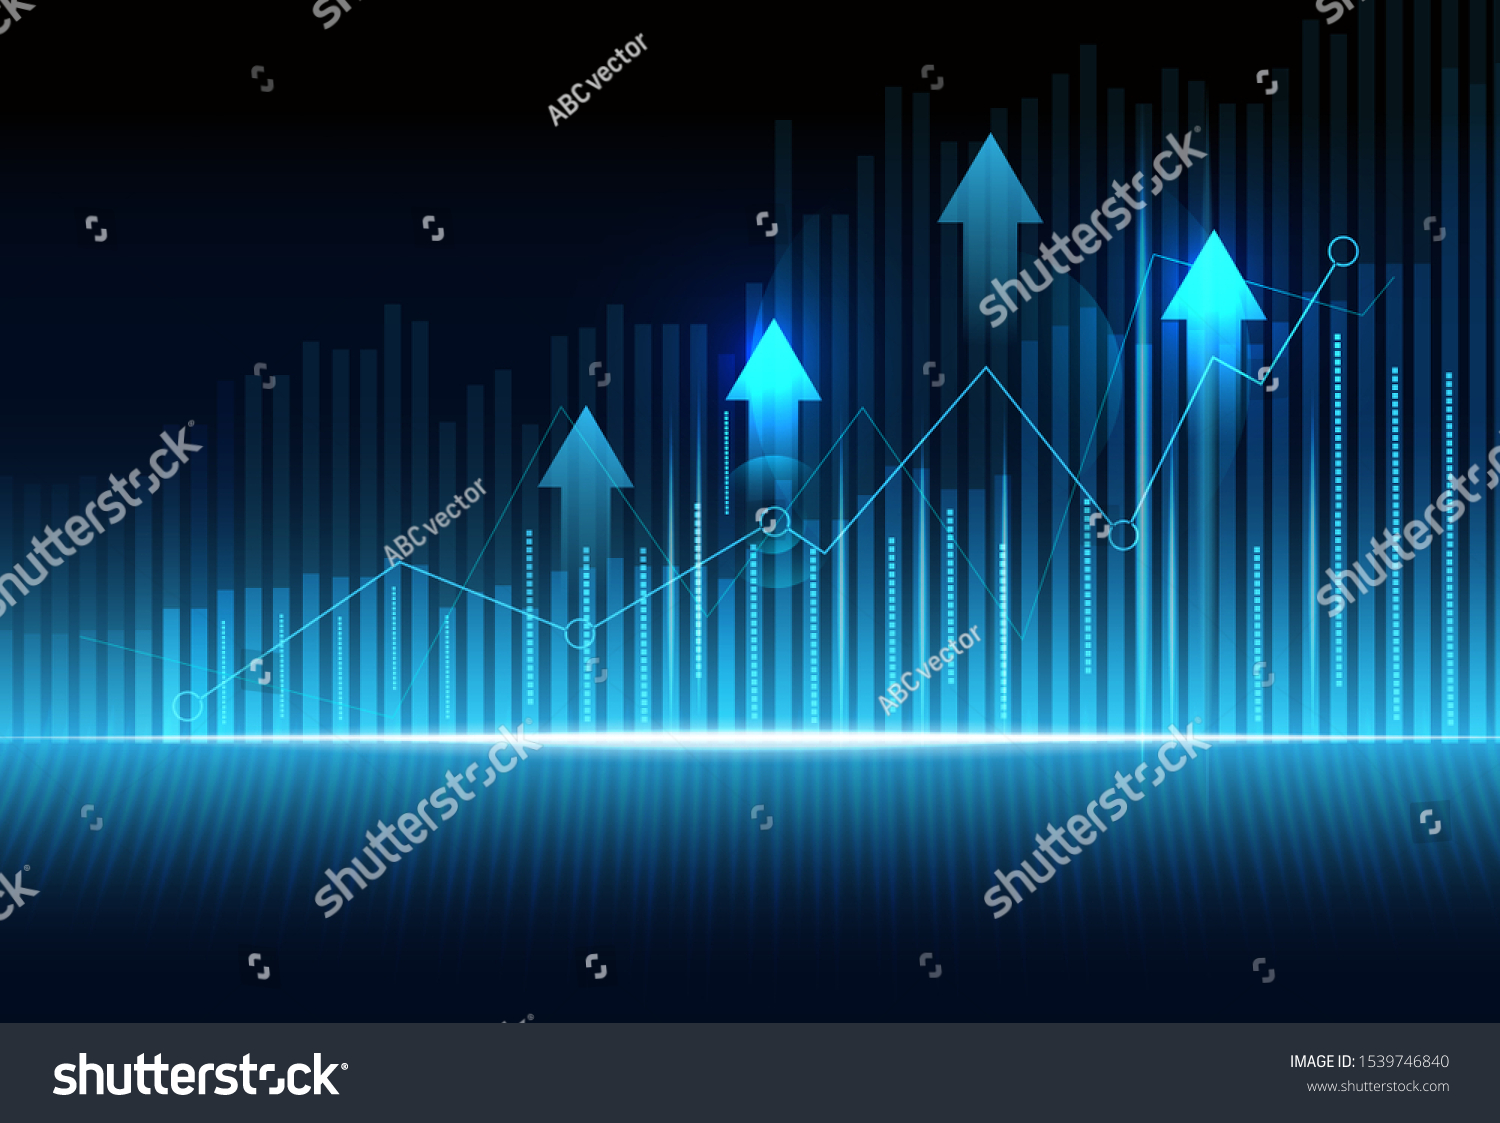 SVG of Business candle stick graph chart of stock market investment trading on blue background. Bullish point, Trend of graph. Eps10 Vector illustration. svg